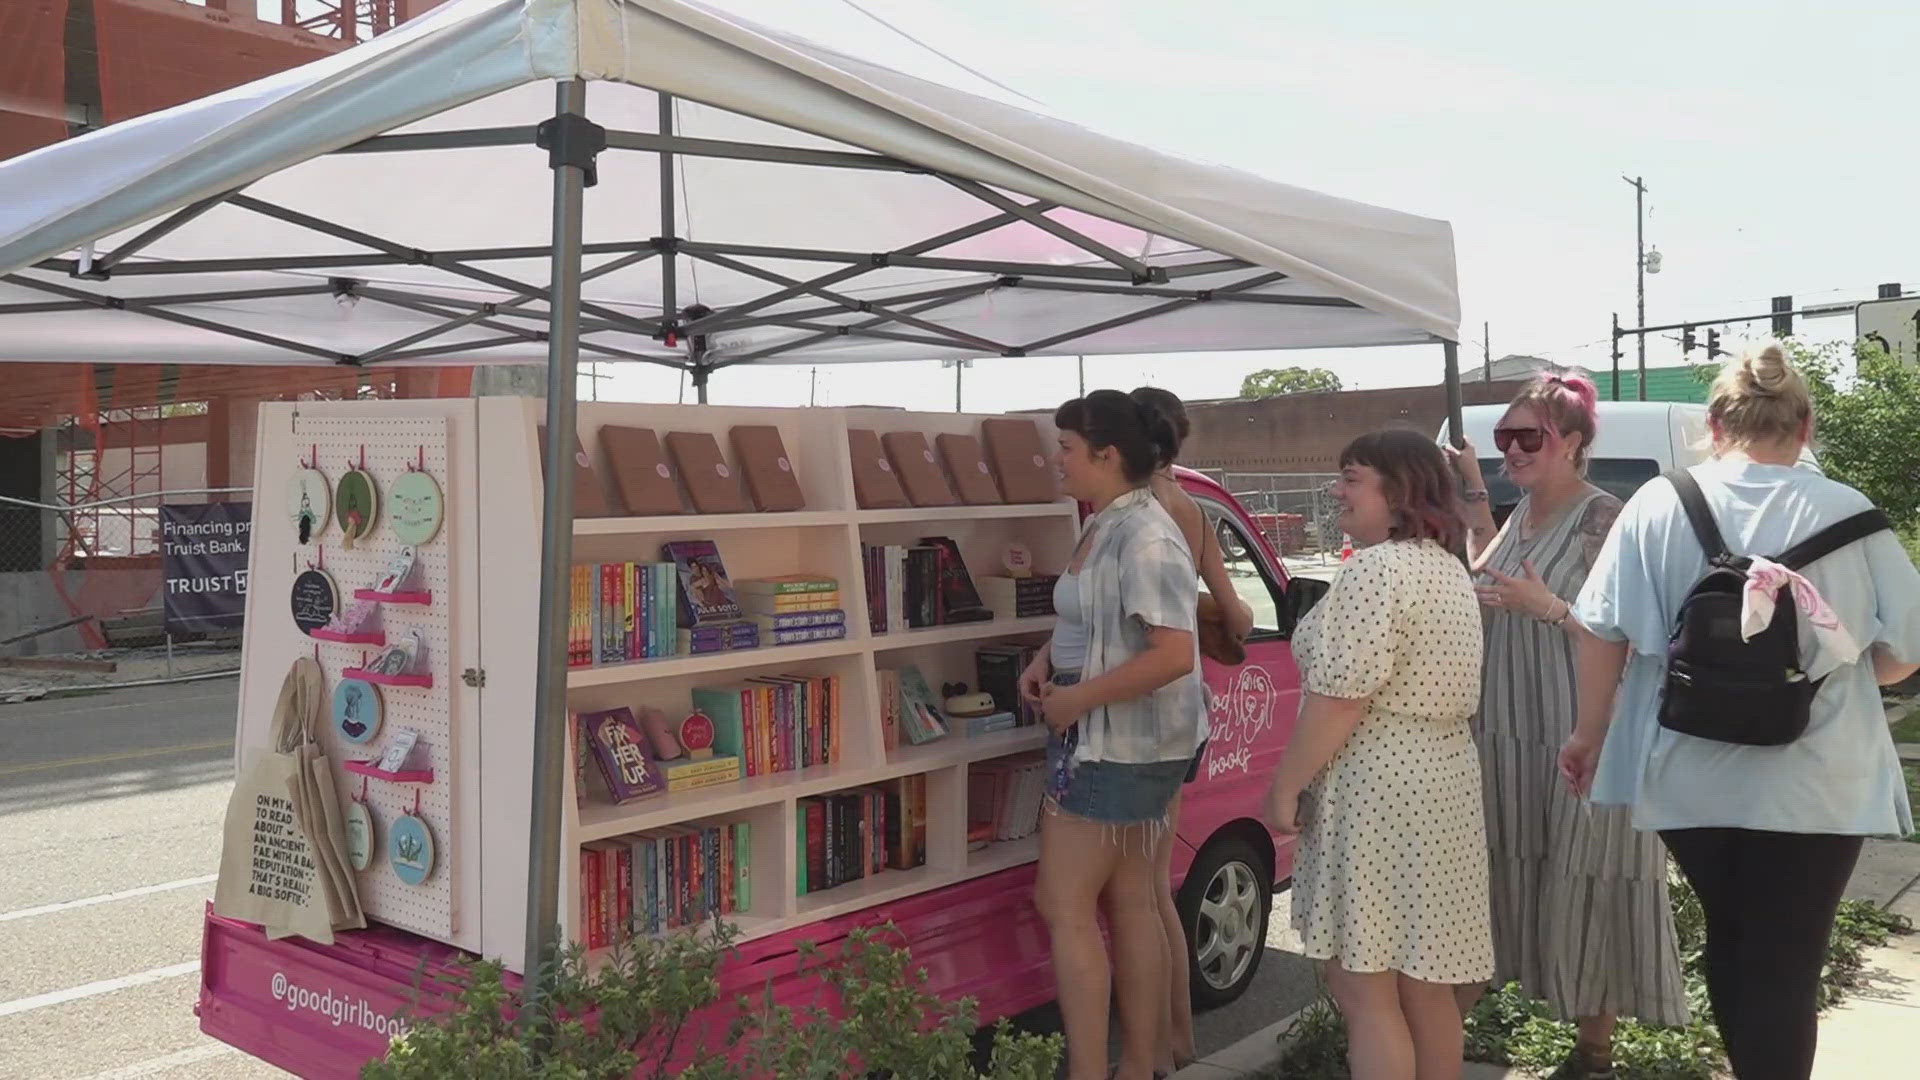 A new mobile bookshop has garnered attention on social media for bringing romance novels to Knoxville communities.